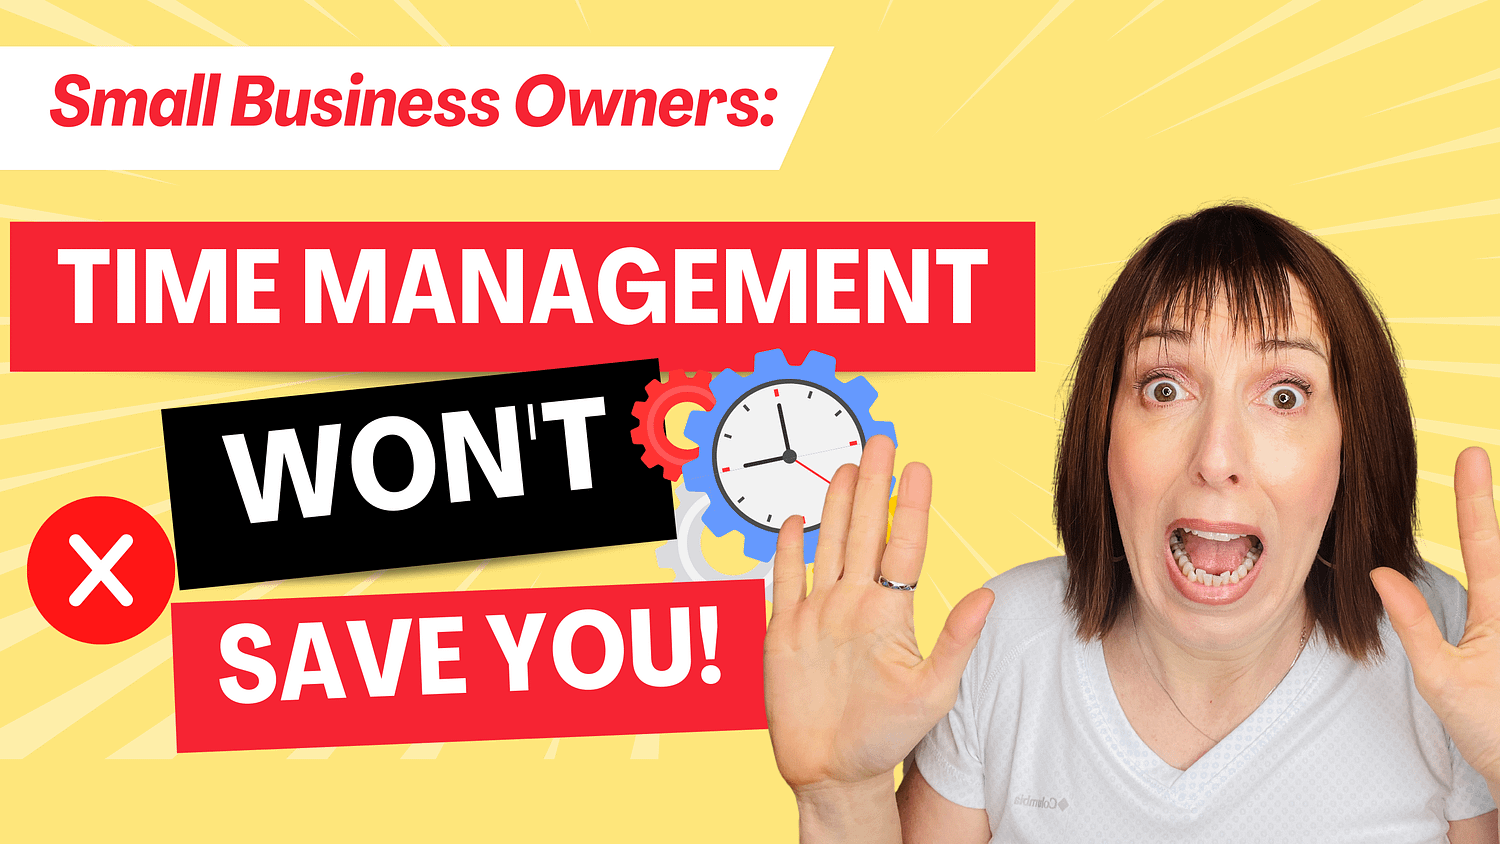 Small Business Owners: Time Management Won’t Save You!